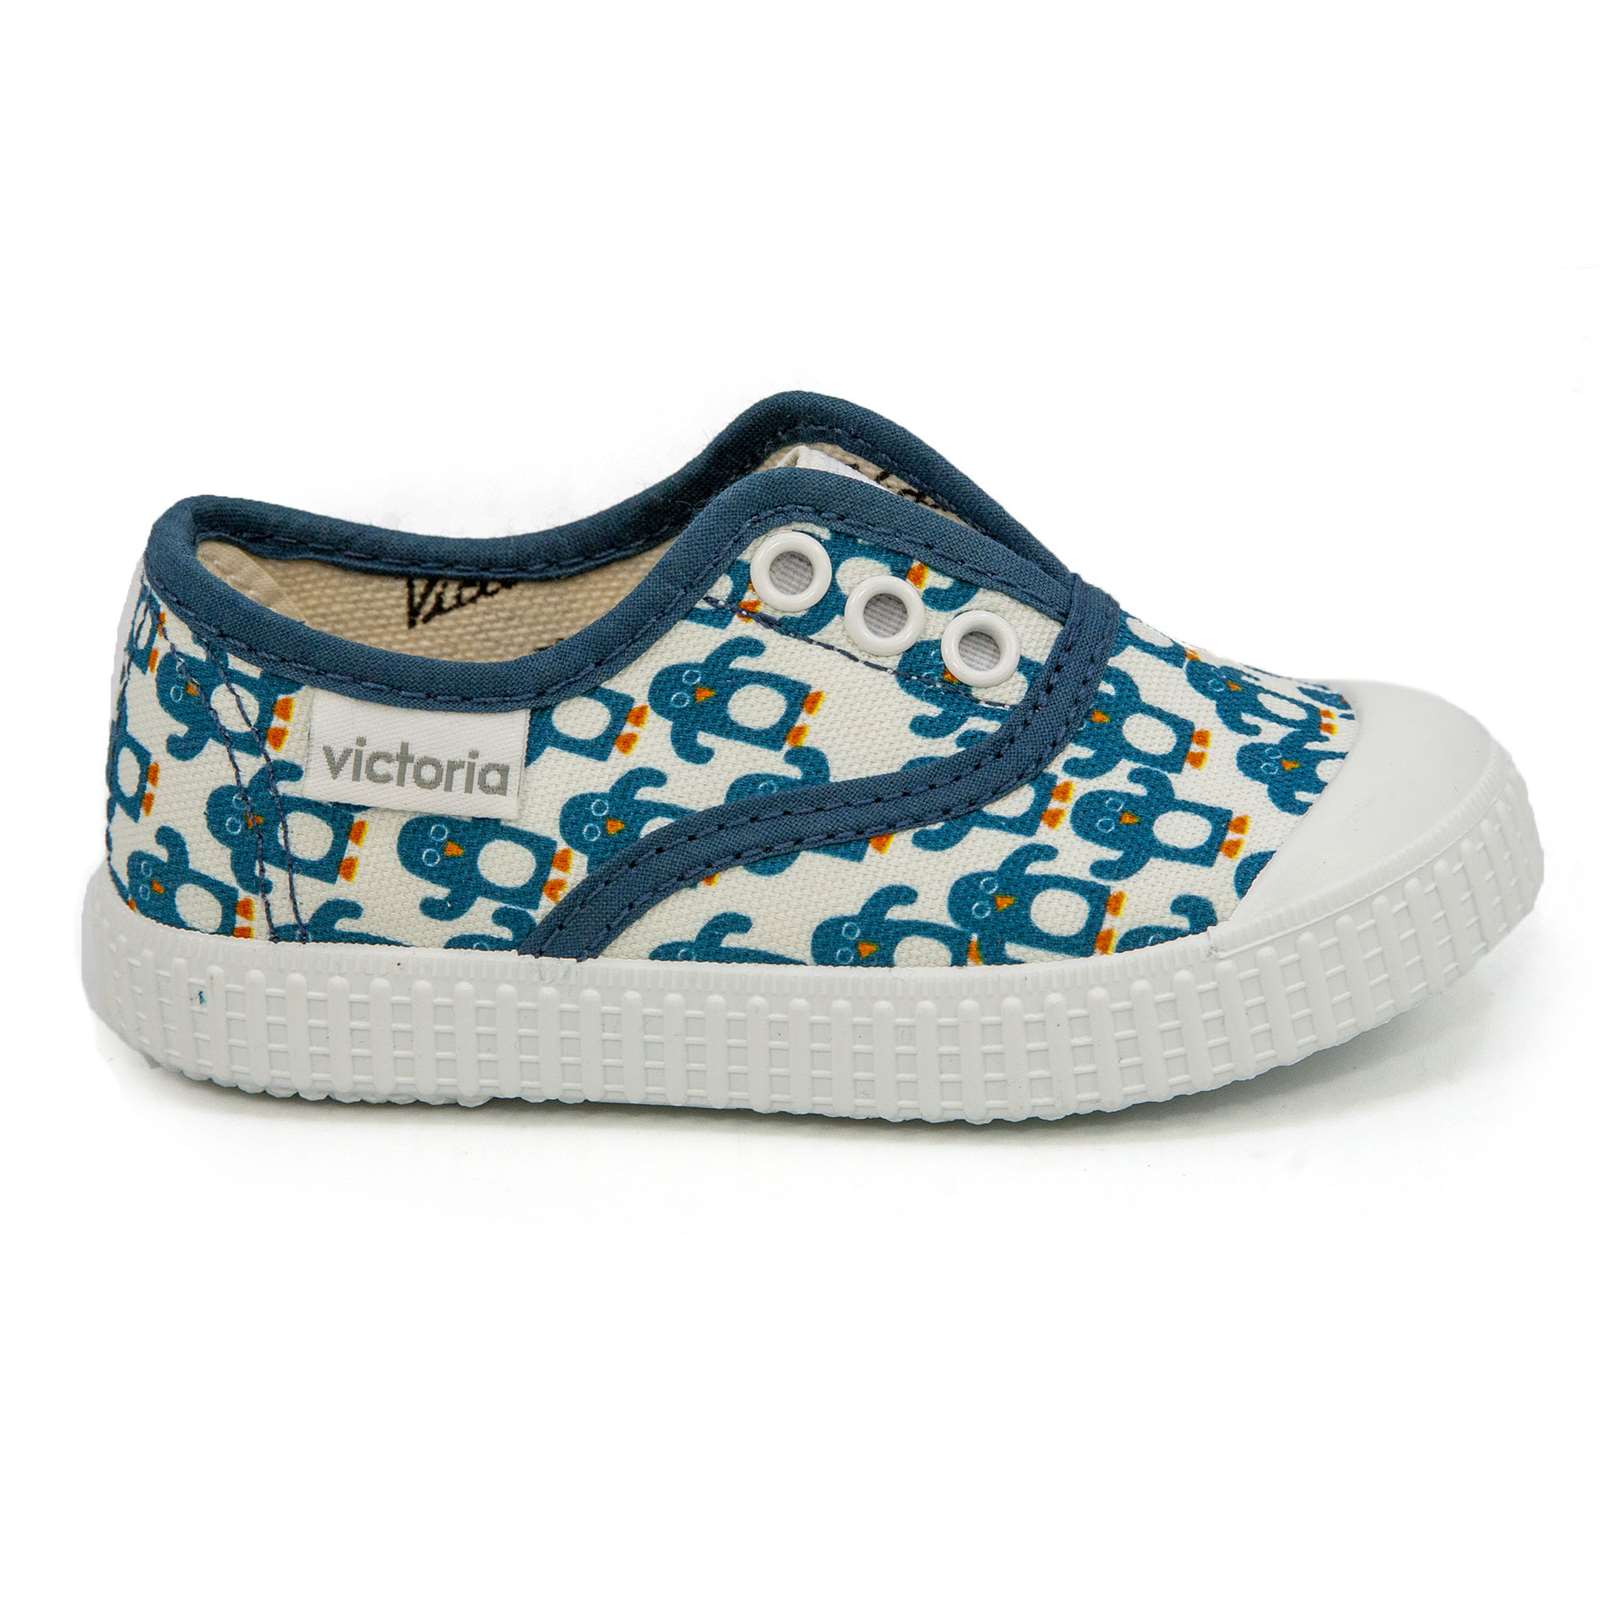 Victoria Girl Slip On Canvas Shoes